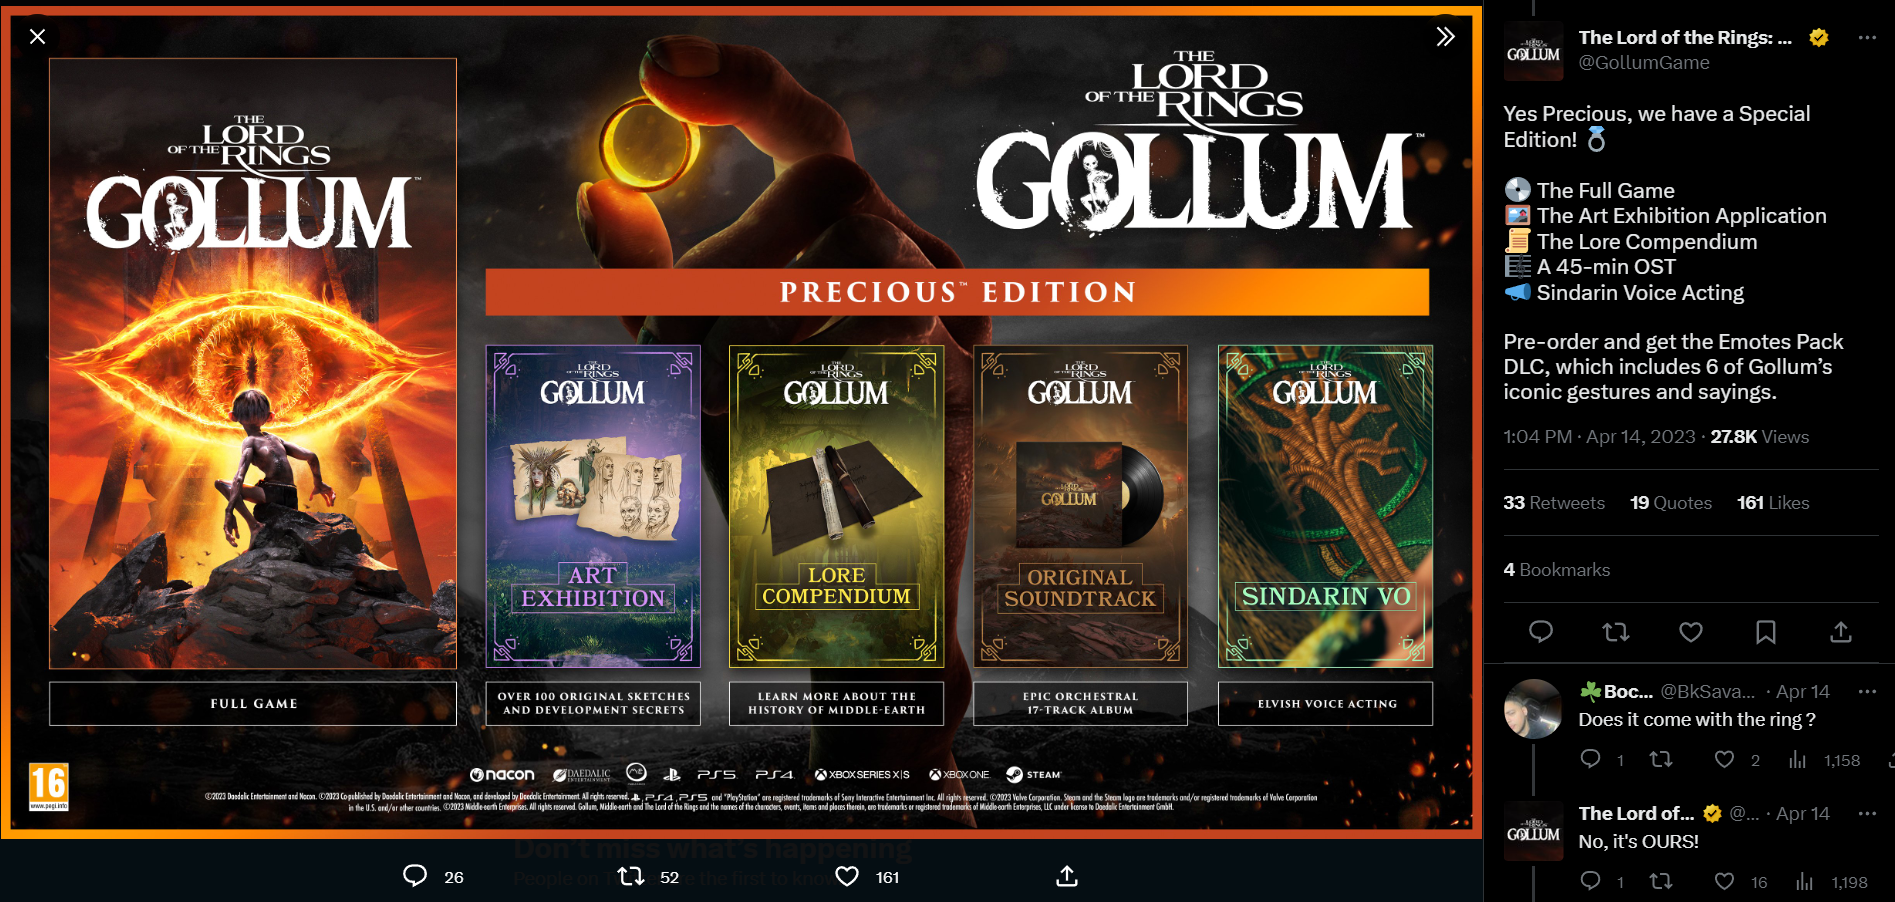 The Lord of the Rings: Gollum official Twitter account promotes the Precious Edition via Twitter